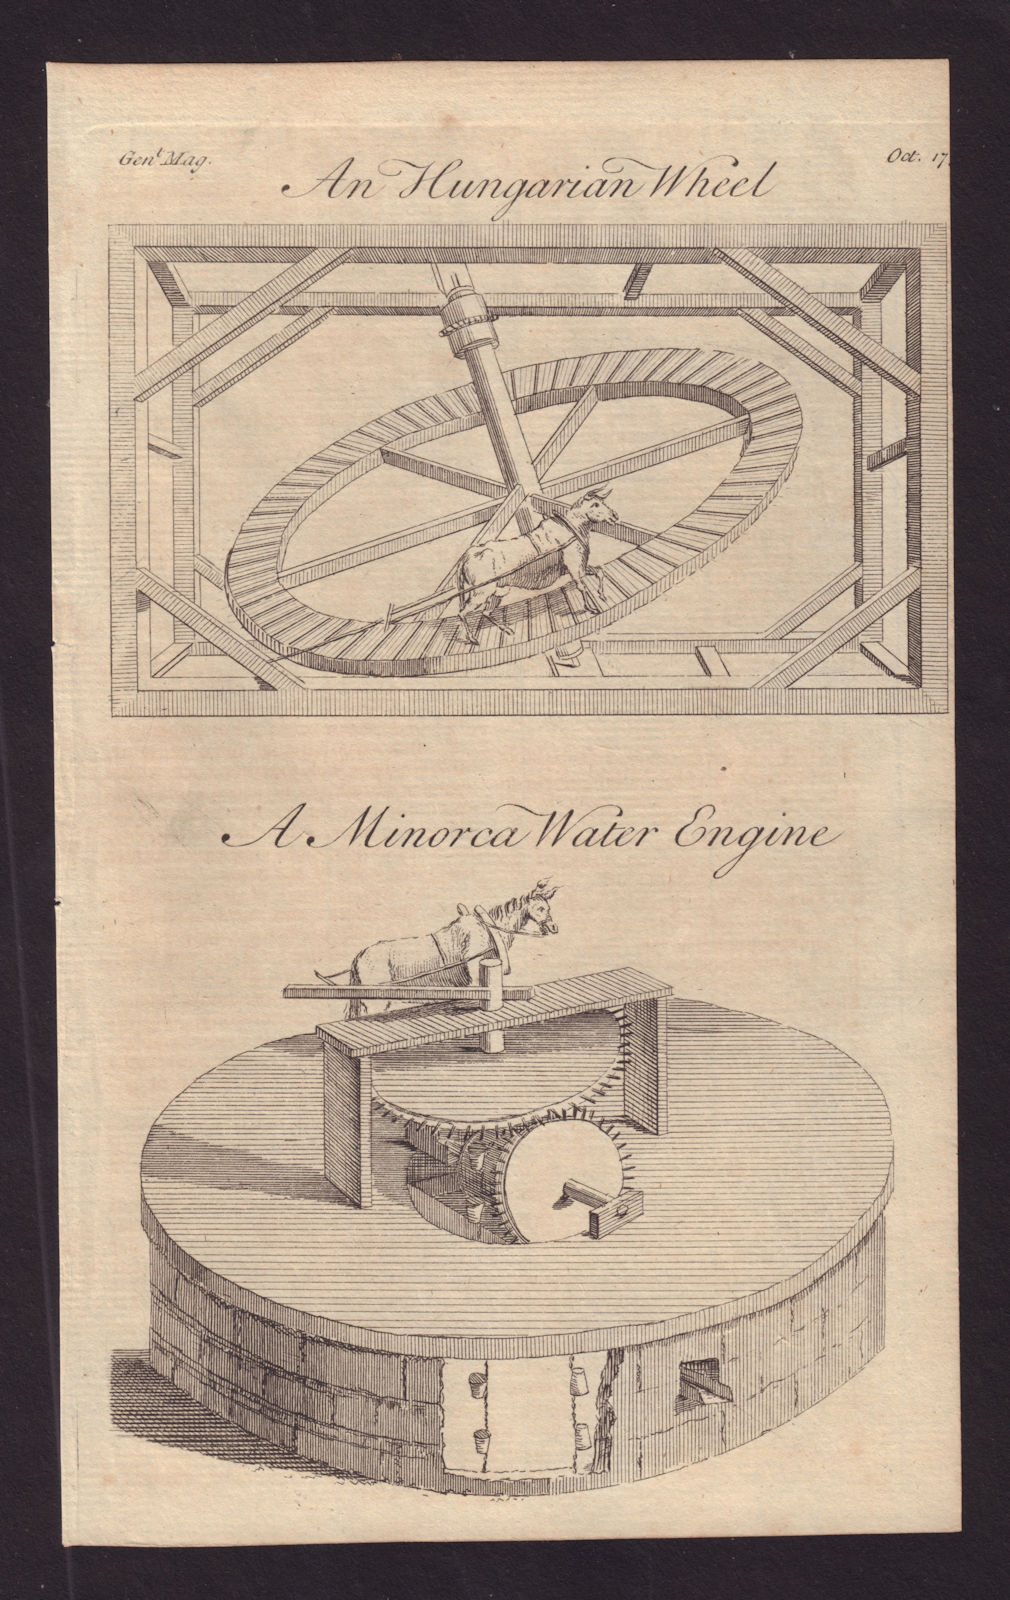 Associate Product An Hungarian Wheel. A Minorca Water Engine. Spain. GENTS MAG 1752 old print